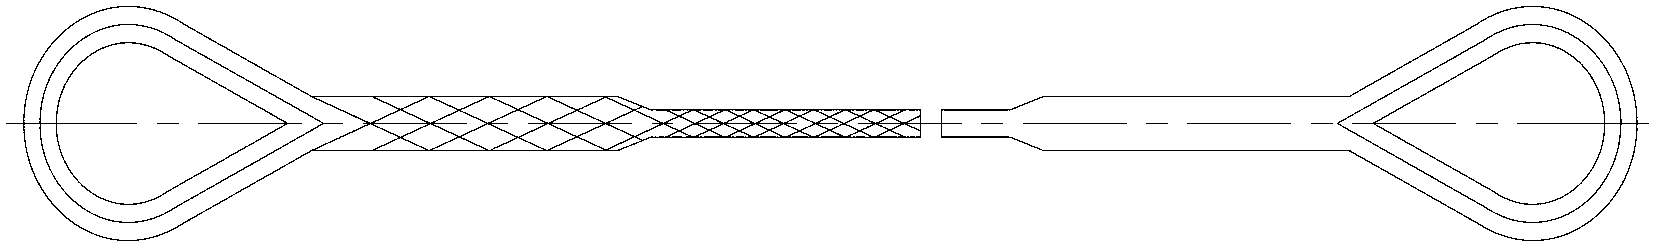 Method for casting and solidifying end portion of fiber rope